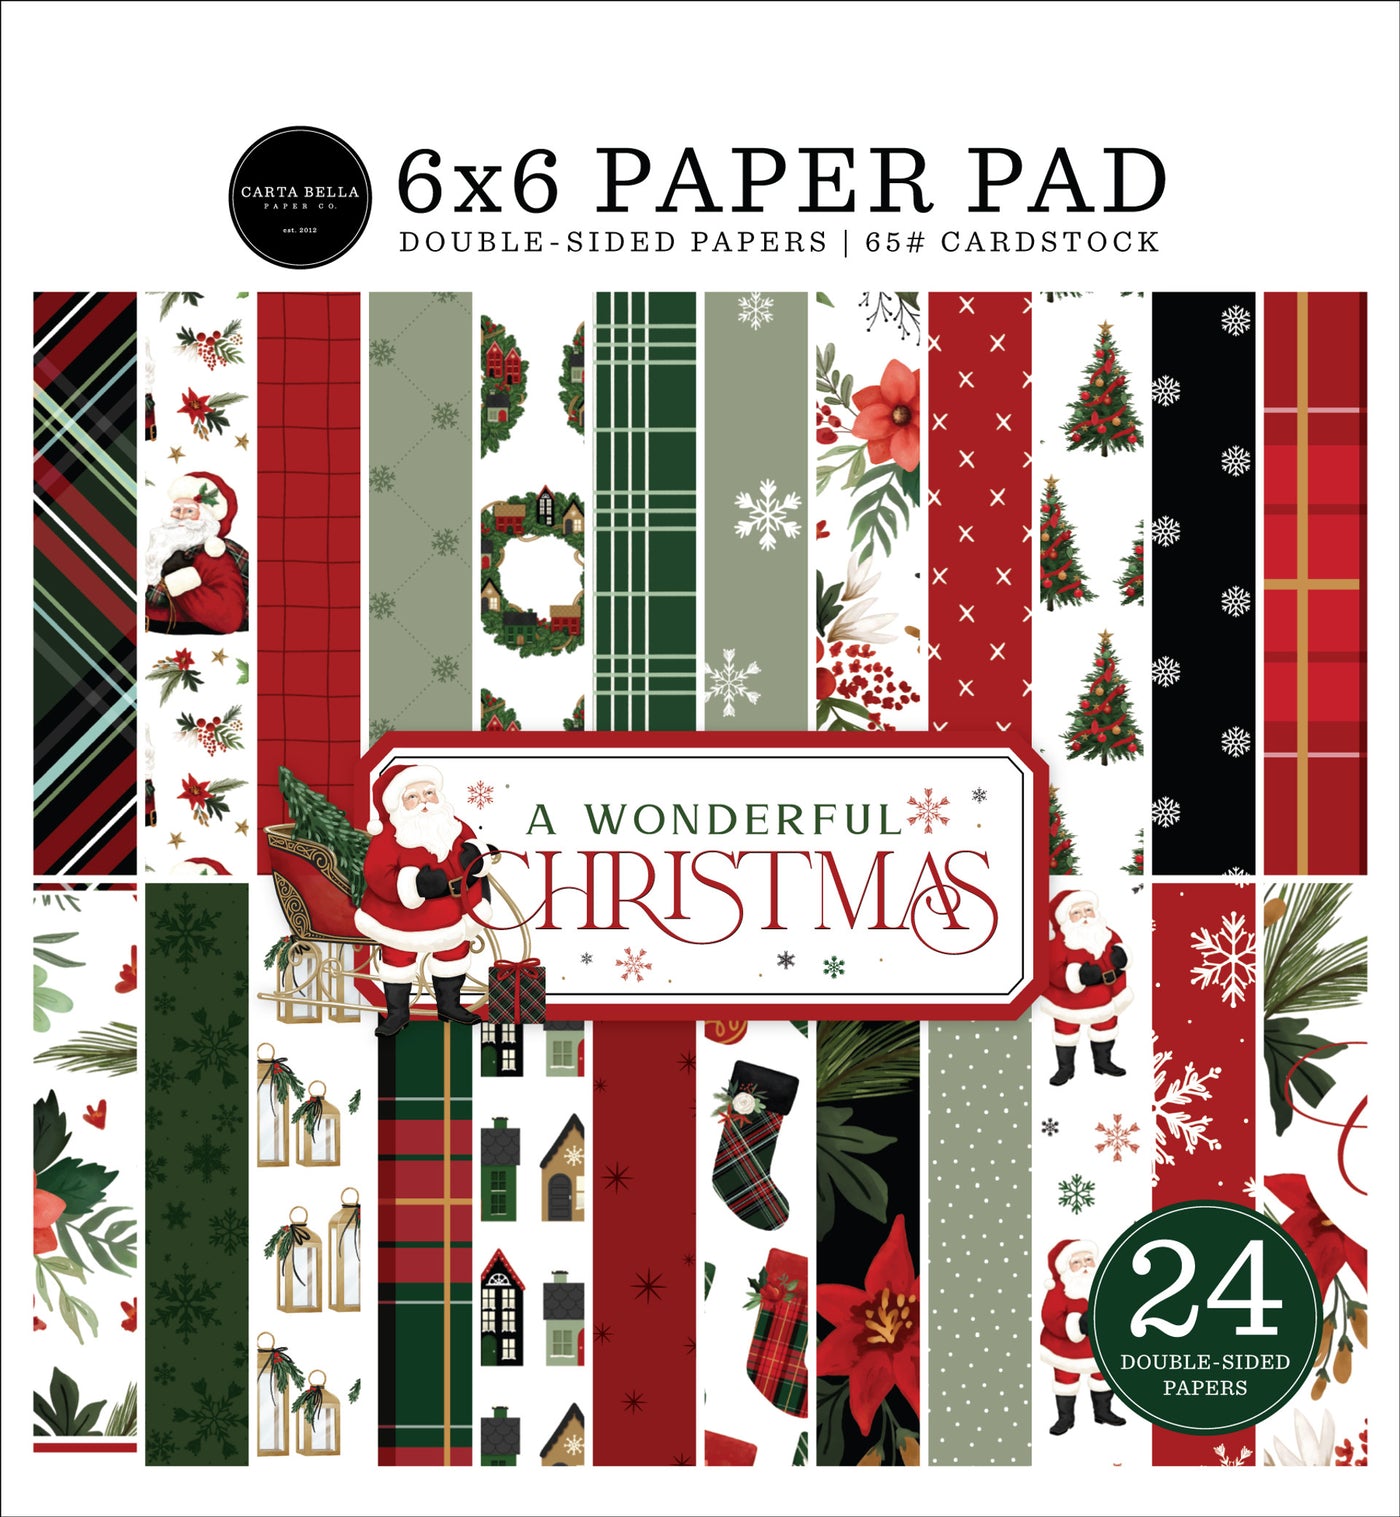 A WONDERFUL CHRISTMAS 6x6 Paper Pad from Carta Bella - 6x6 pad with 24 double-sided sheets. Scaled-down images are great for card making and similar crafts. Pad has a classic colored Christmas theme with florals!